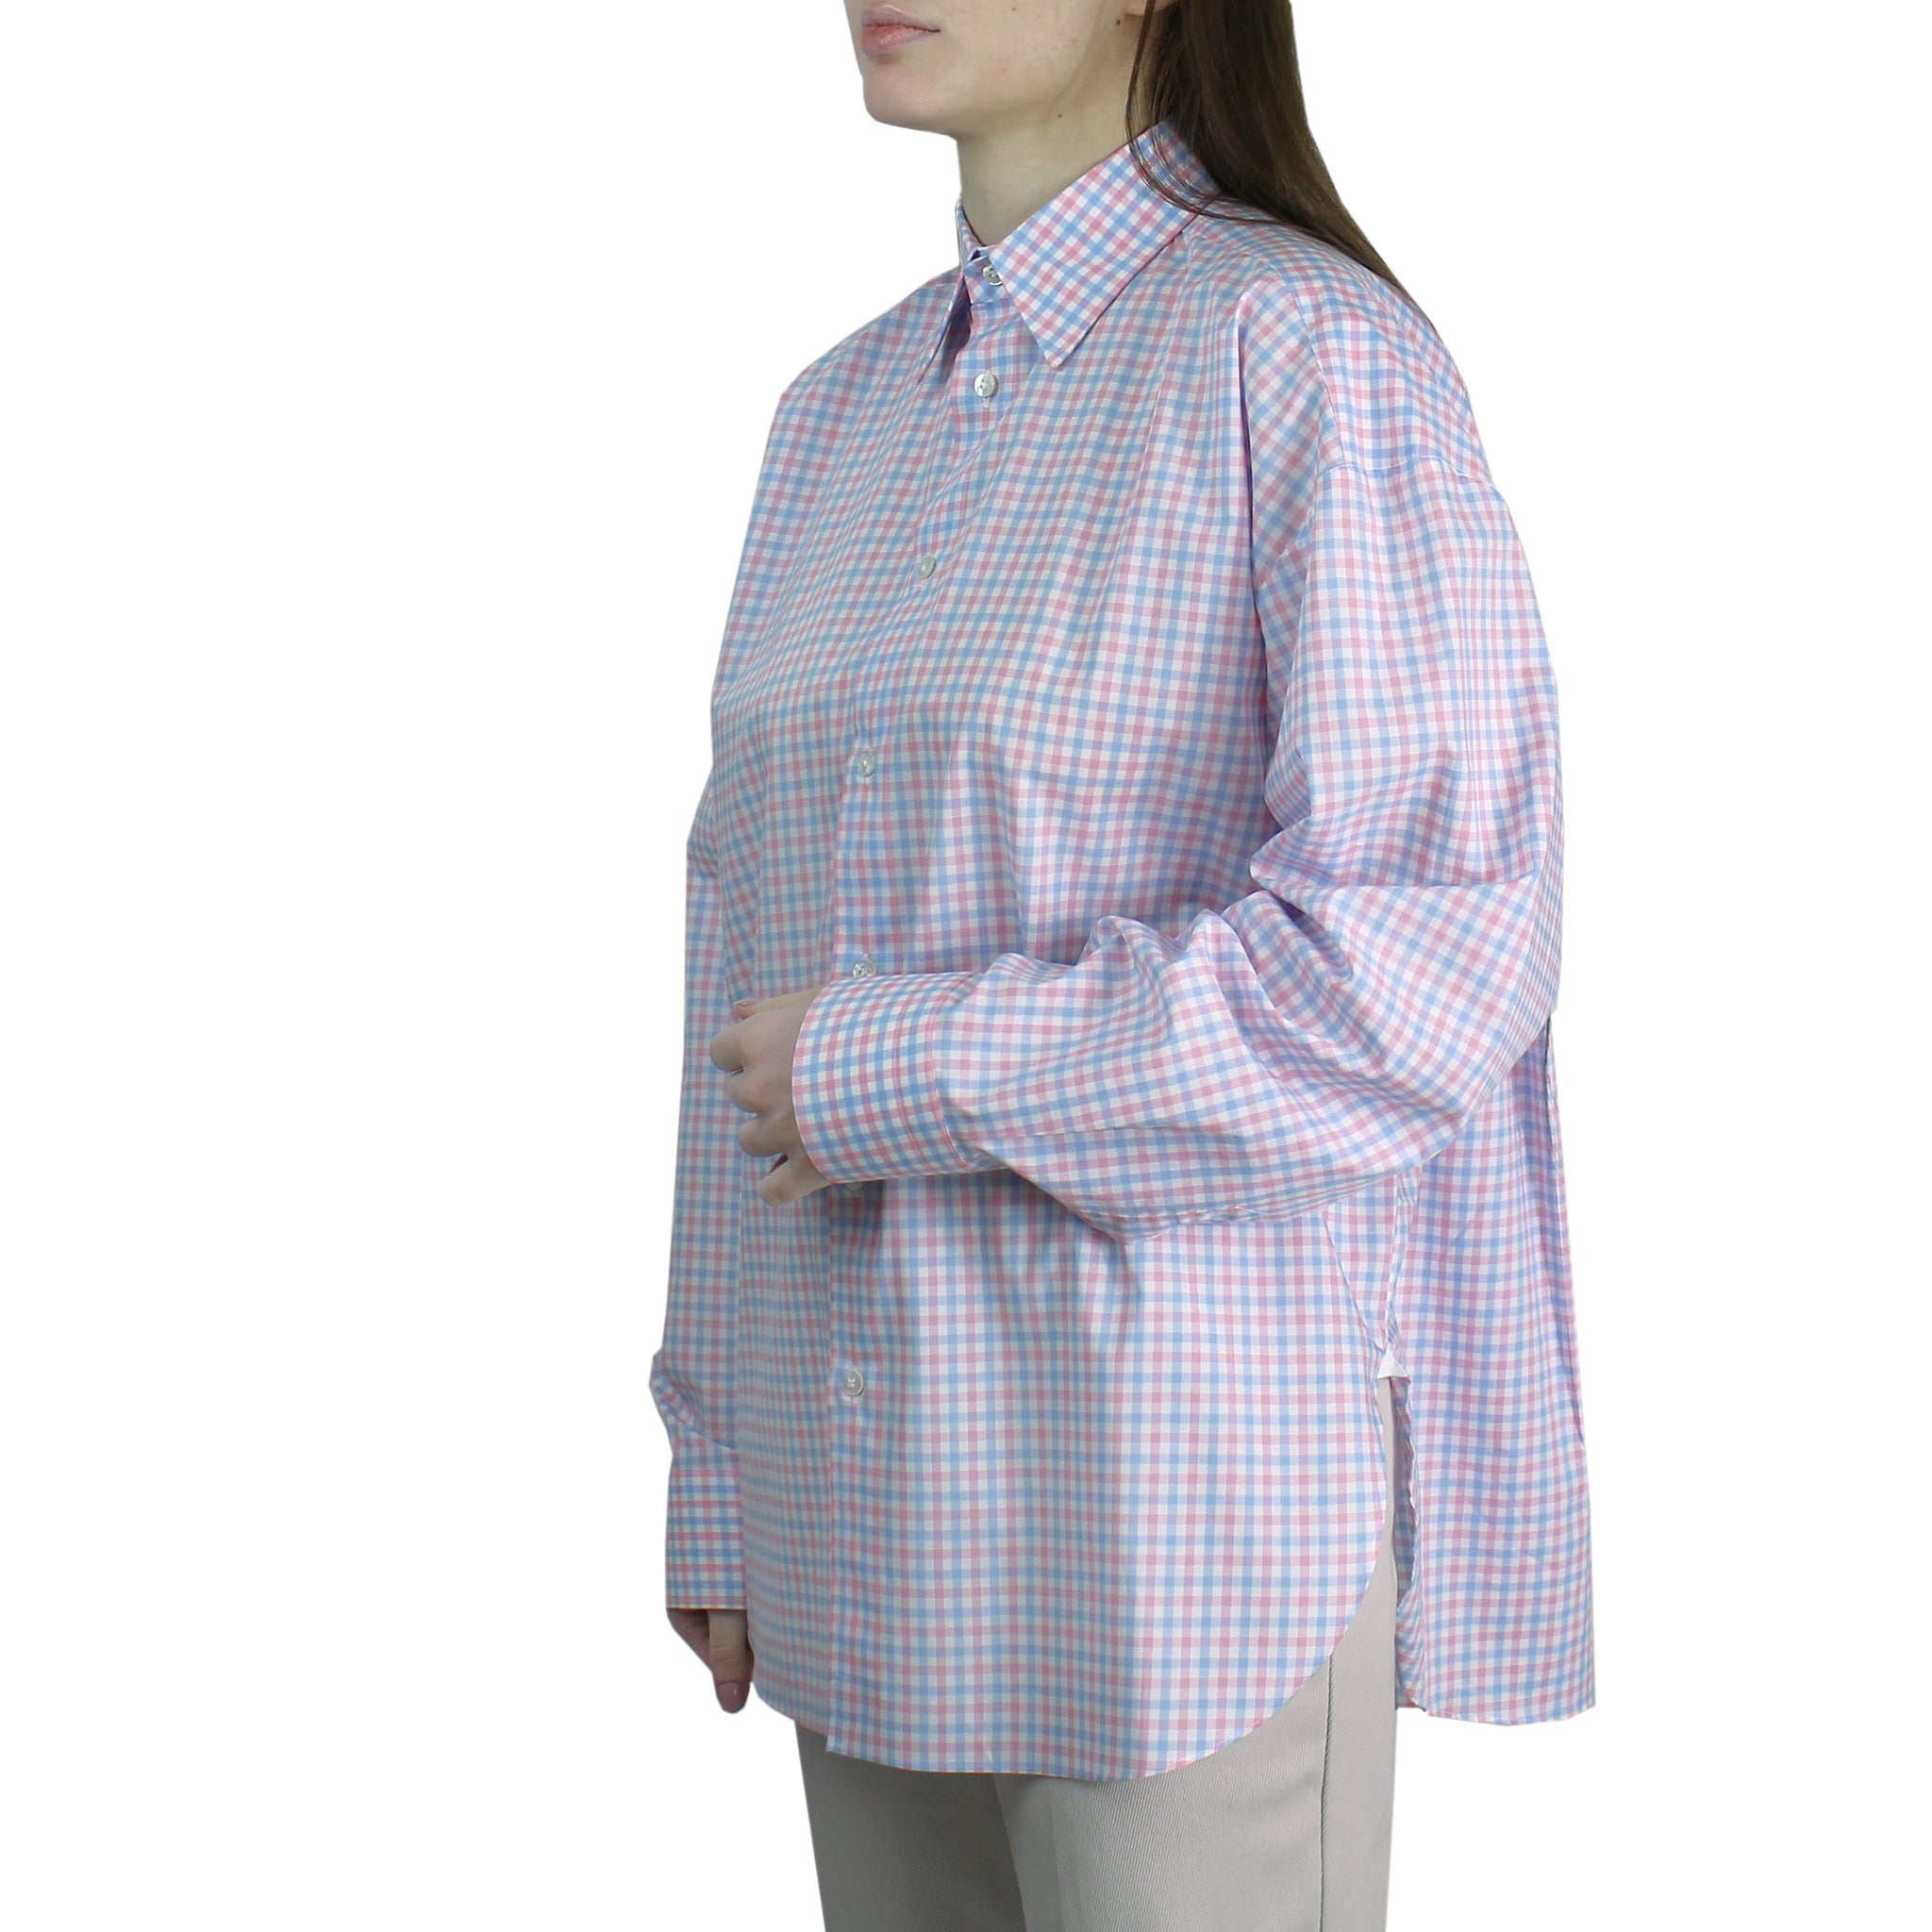 Women's over fit shirt in light blue and pink checked cotton